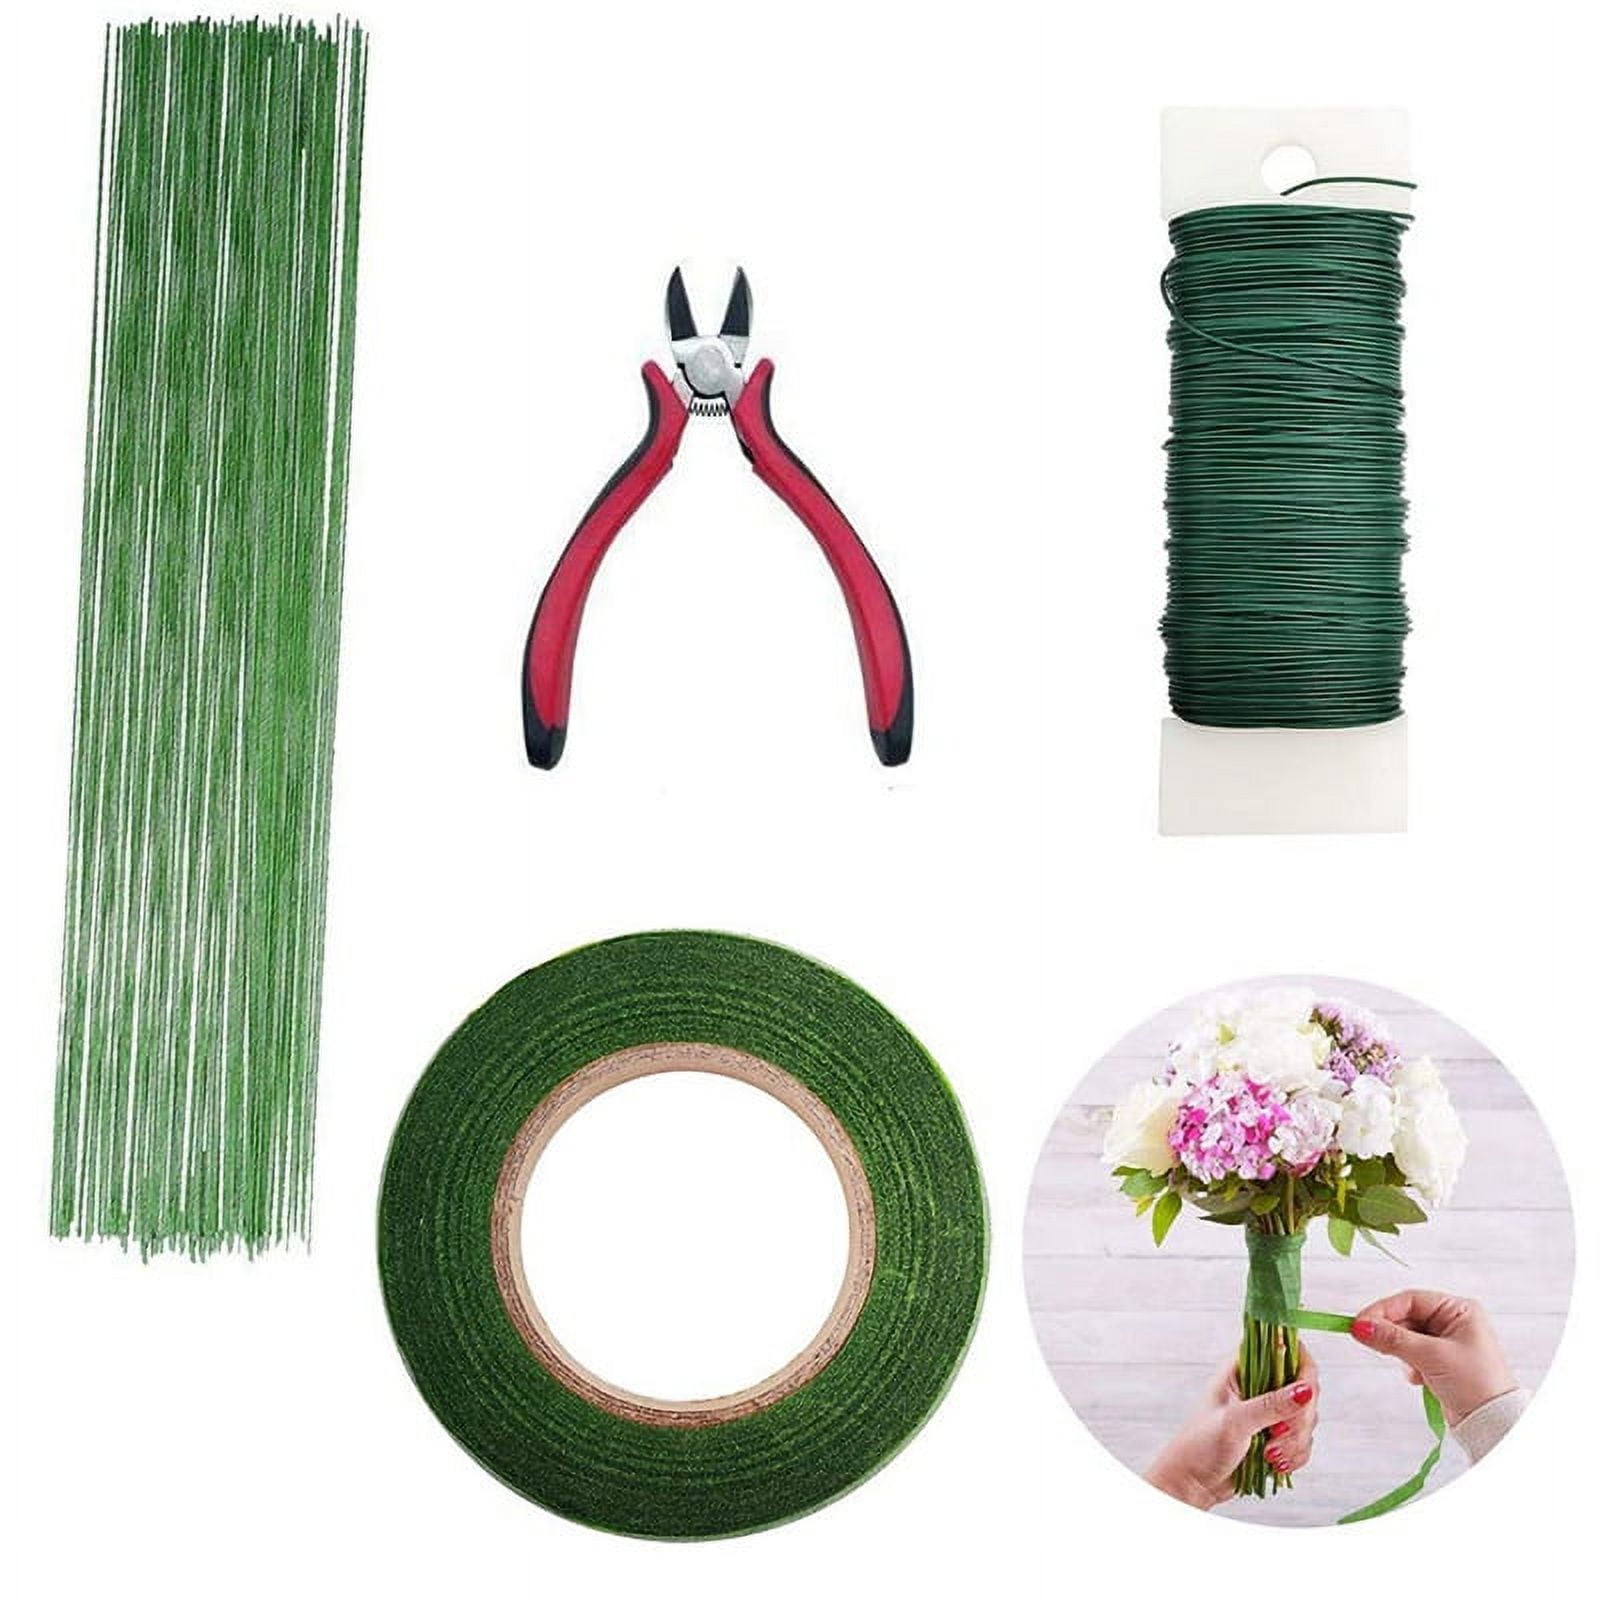 Green Self Adhesive Floral Stem Tape Wire For DIY Wrinkle Paper Wrap  Garland Wreaths Decorative Plastron And Rose Flower Stamen Crepe Paper  Flowers From Bdhome, $7.58